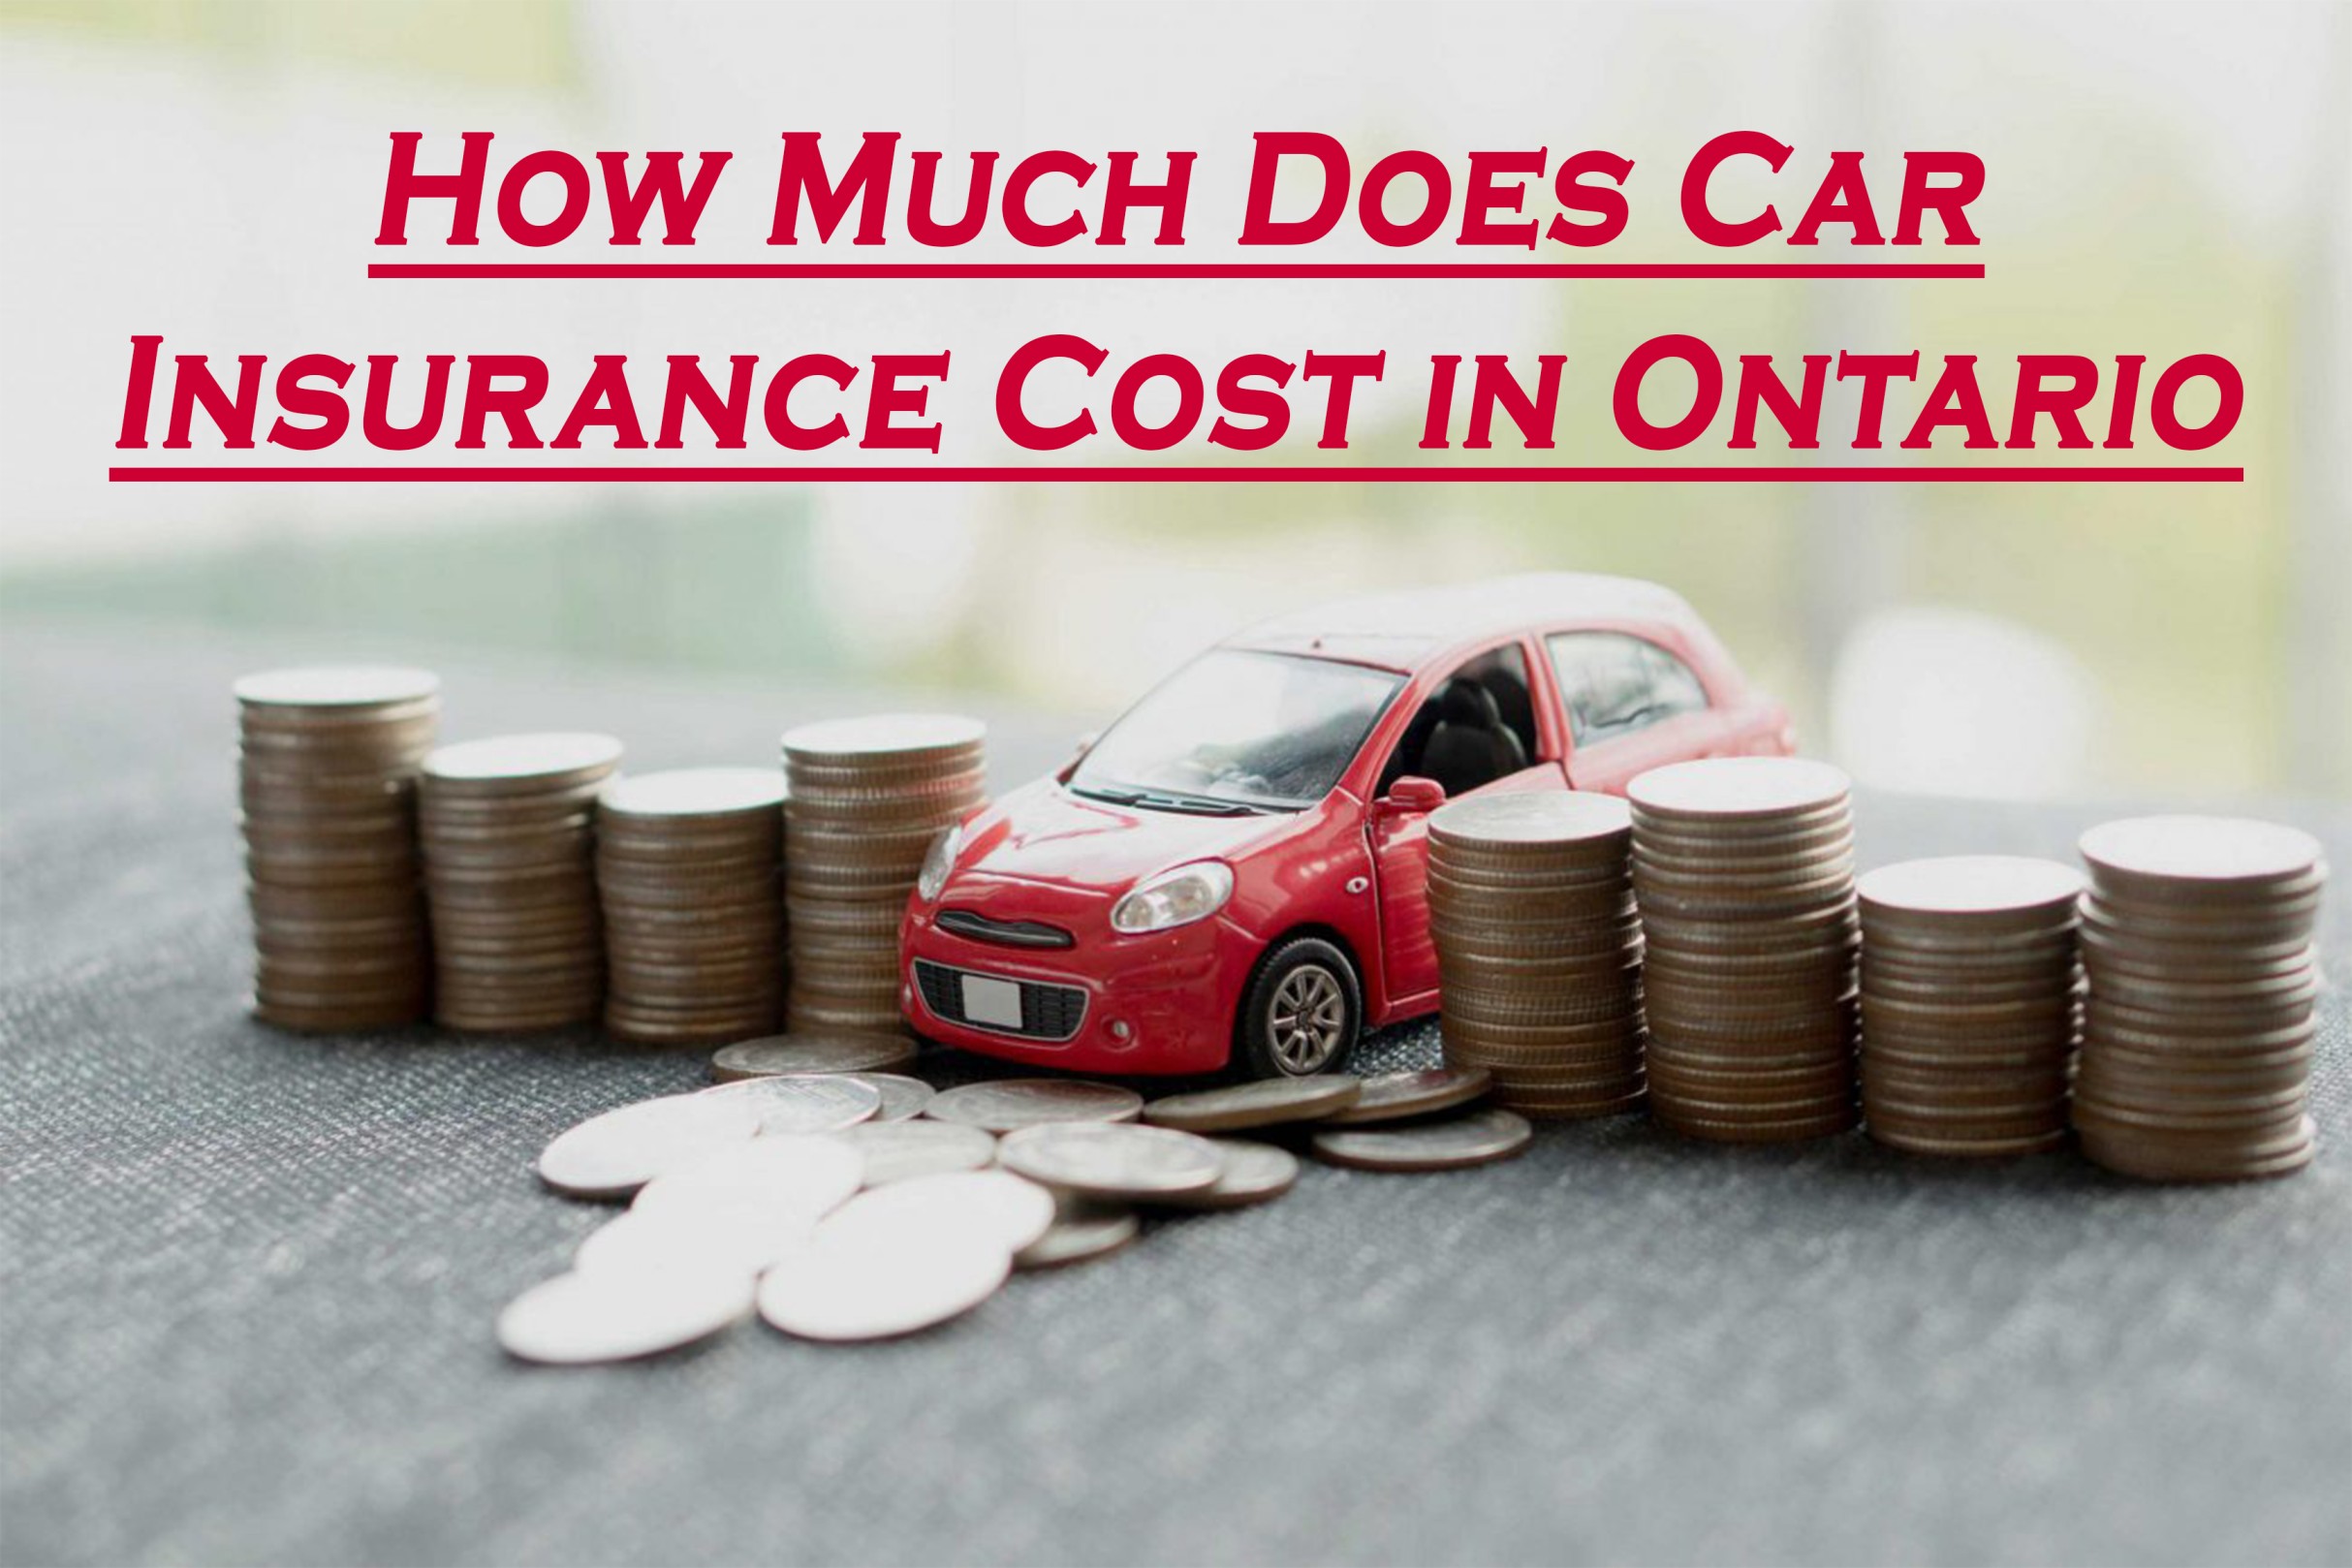 How much does car insurance cost in Ontario